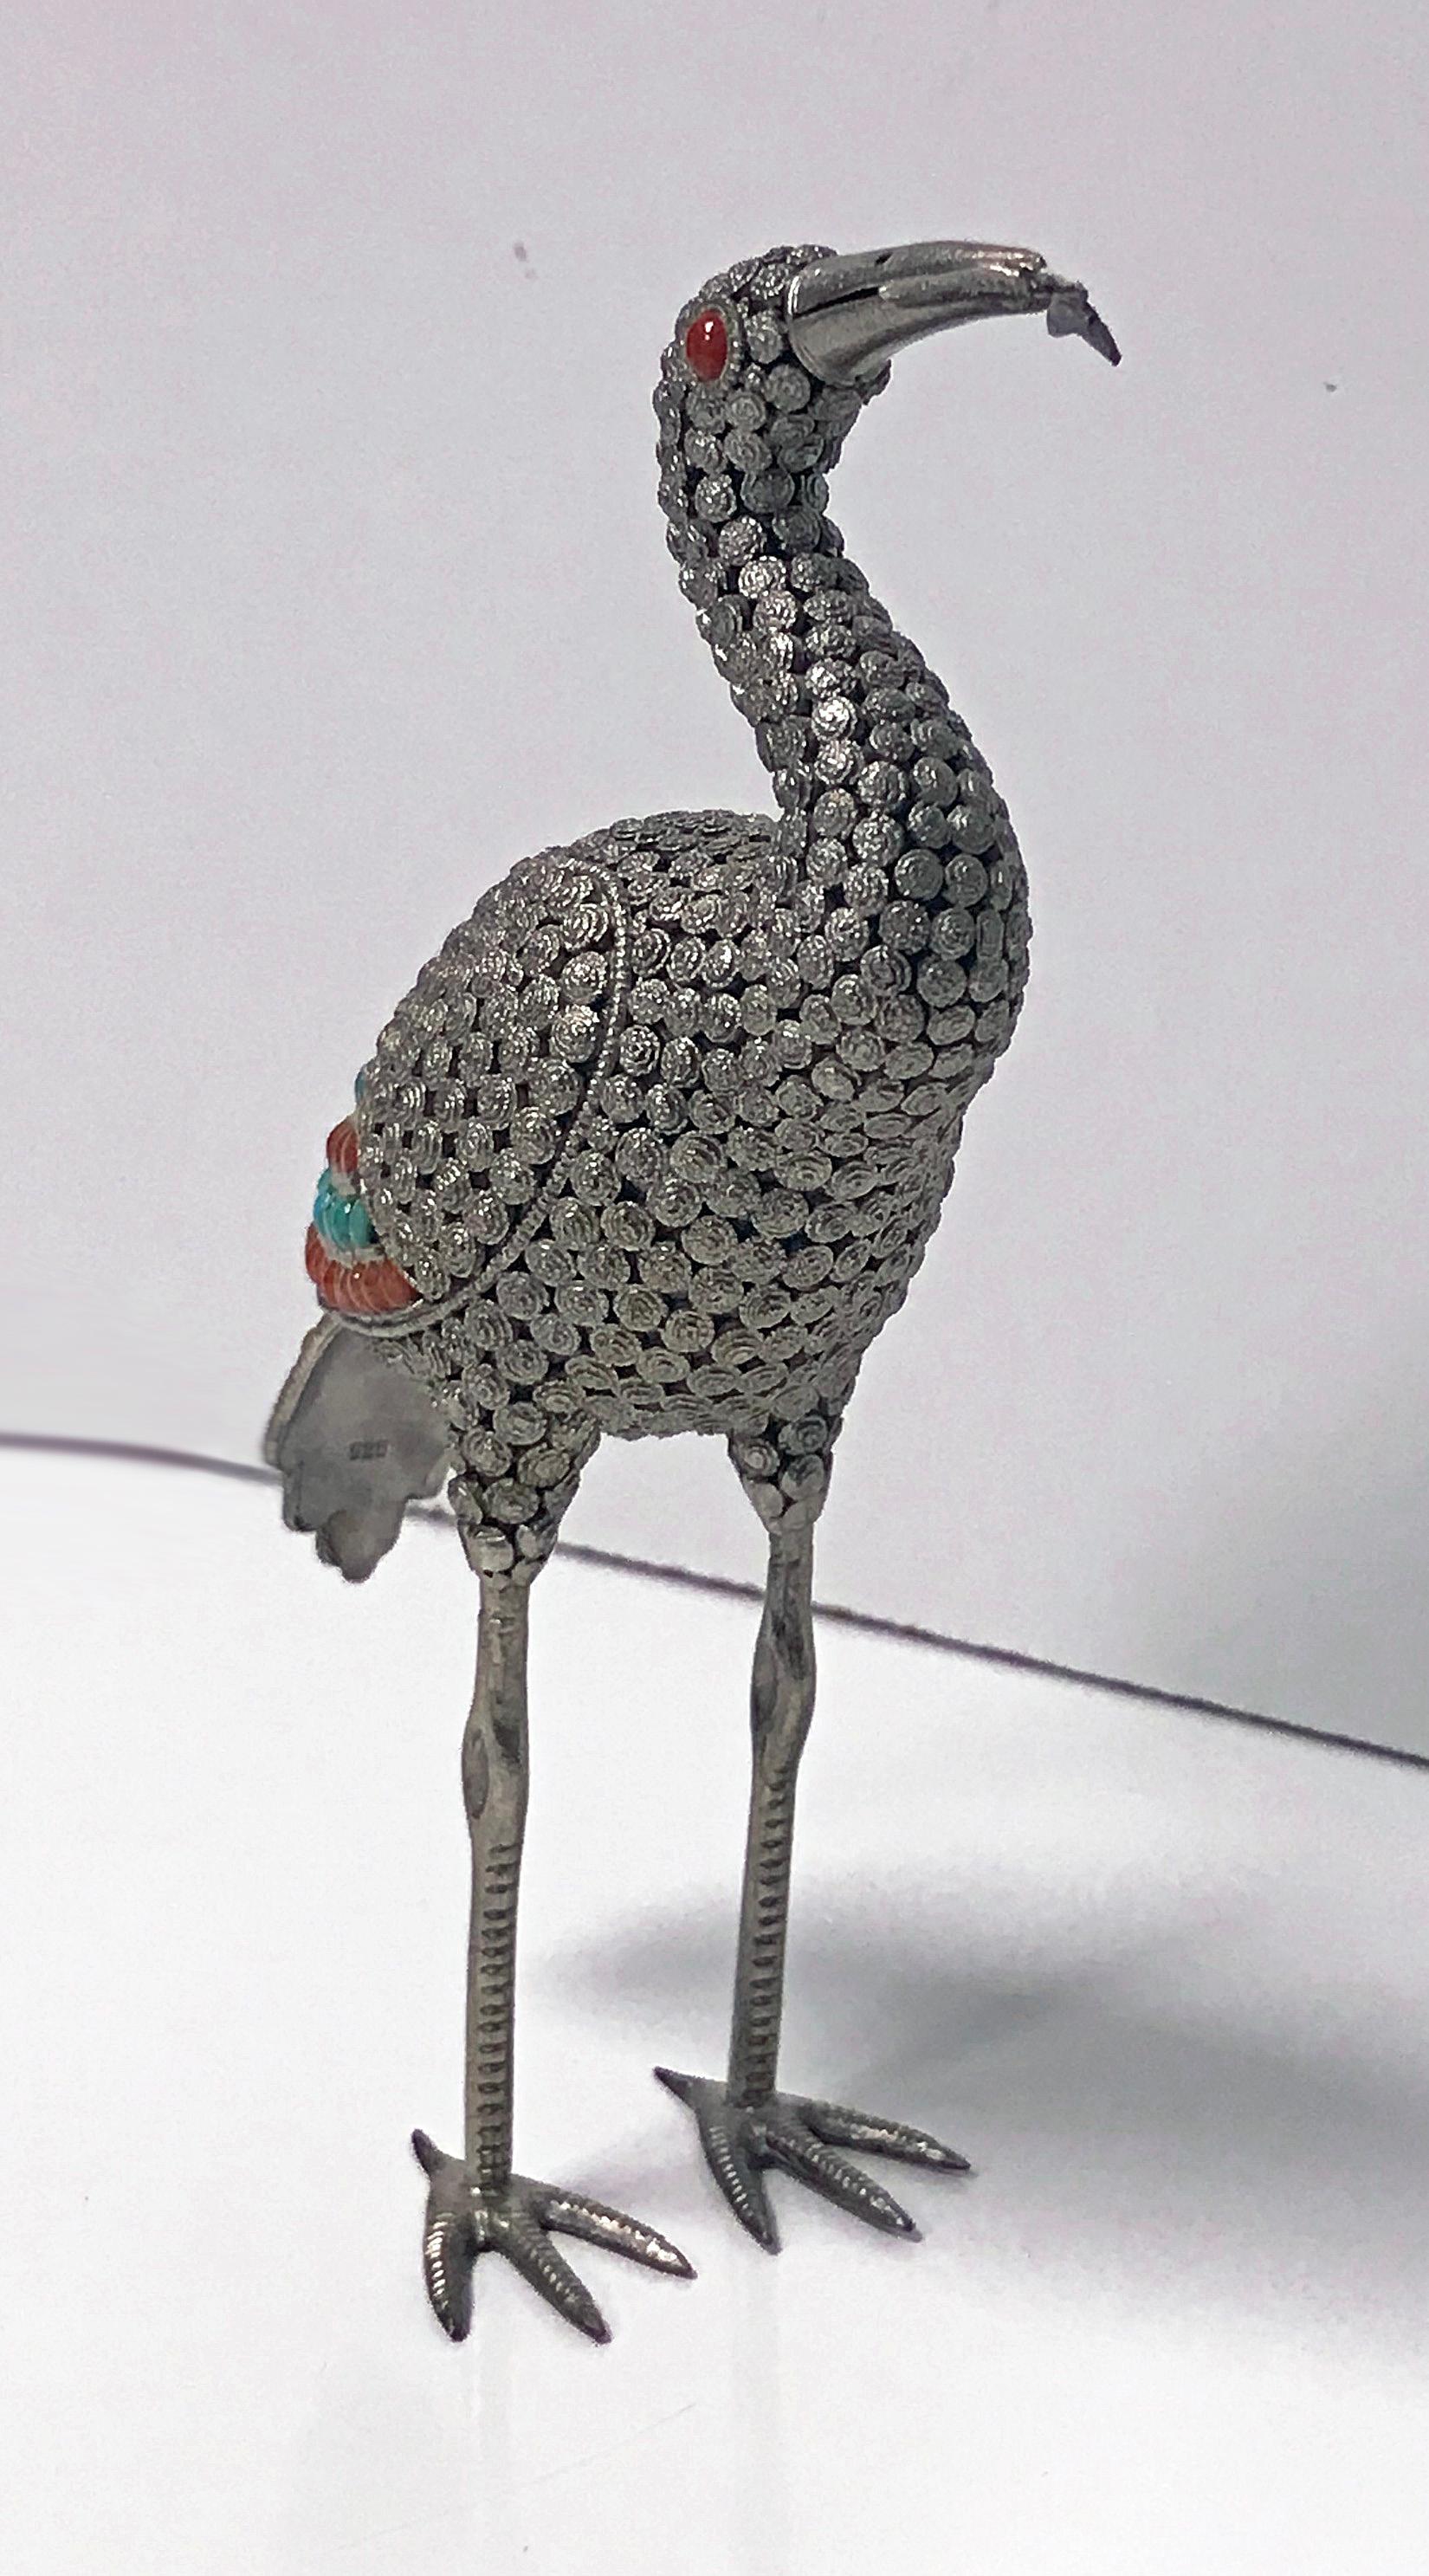 925 Sterling silver and multi colour stone inlay Heron, Egret or Emu, probably Chinese, C.1950. The bird is highly detailed with a fine silver wire work filigree body, wings, and tail and has a fish in its mouth. The silver set with numerous coral